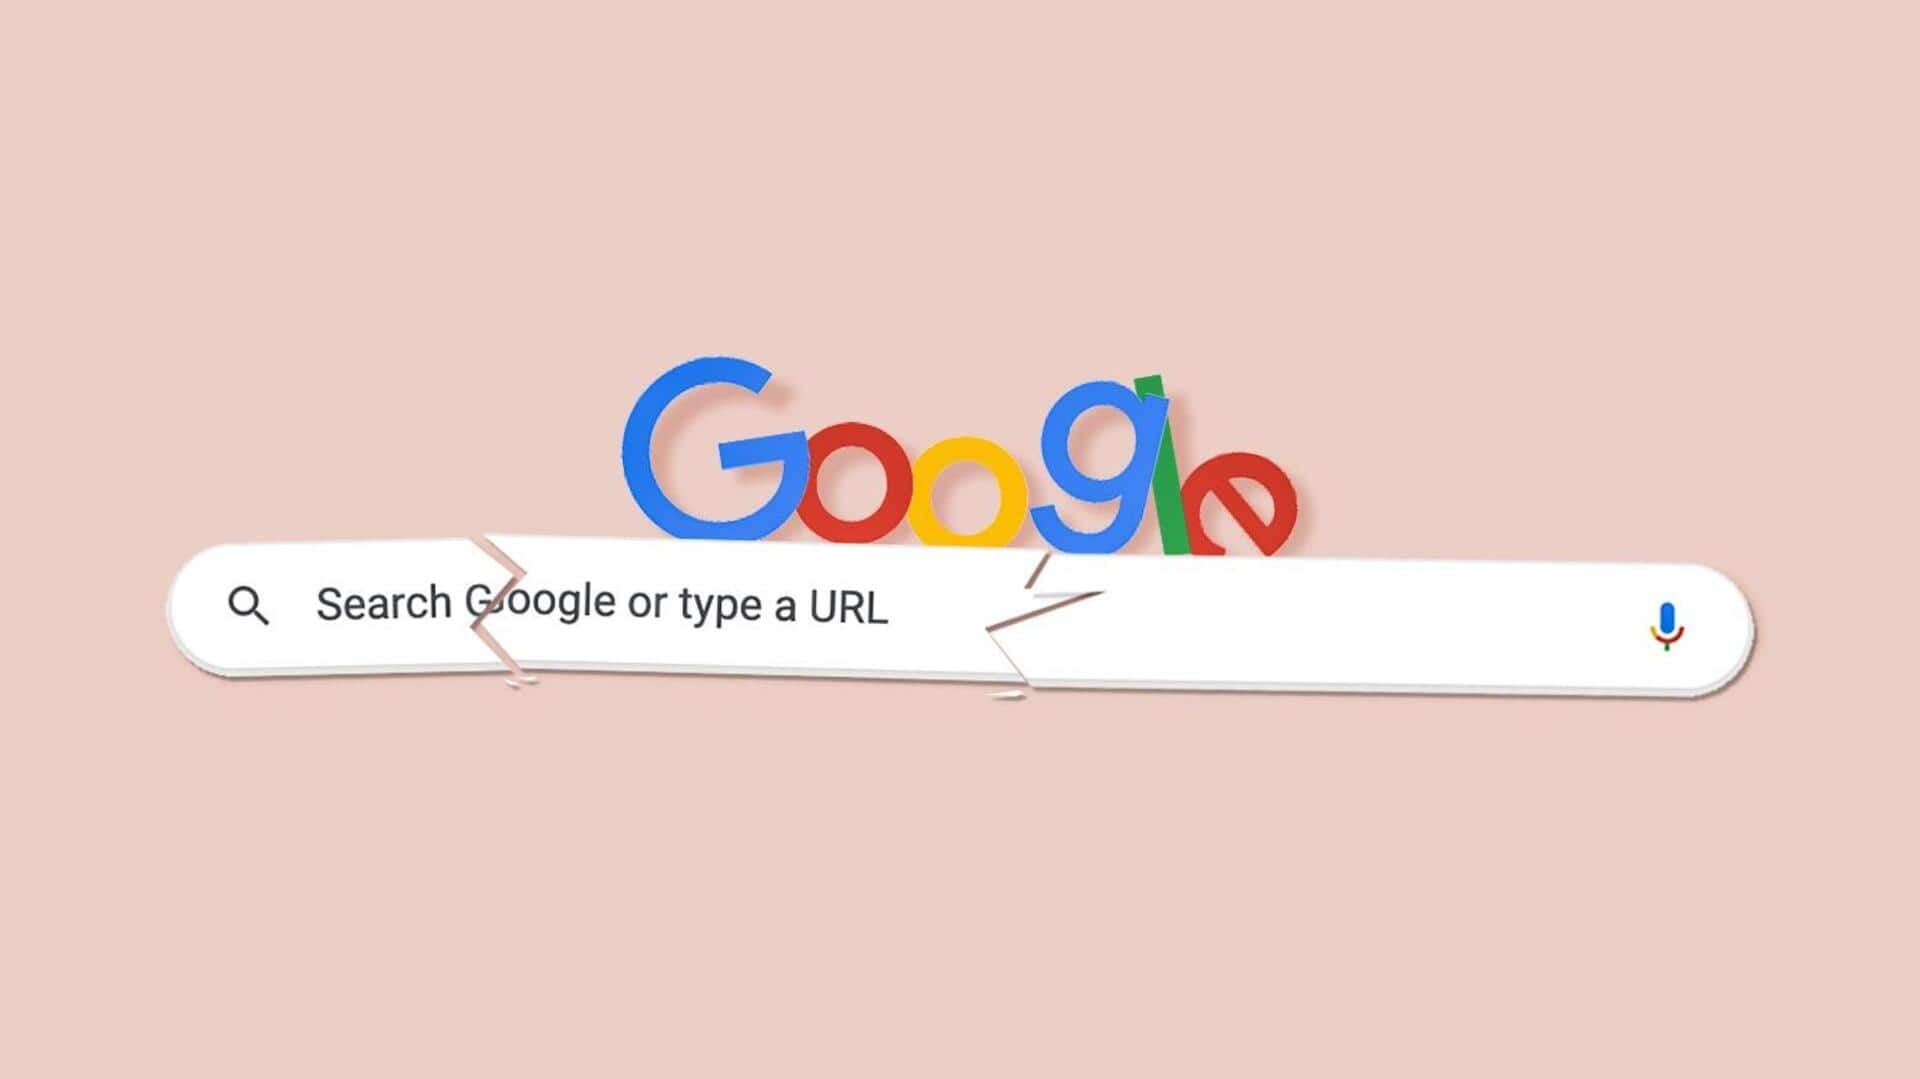 Your Google Search results could be wrong, thanks to AI